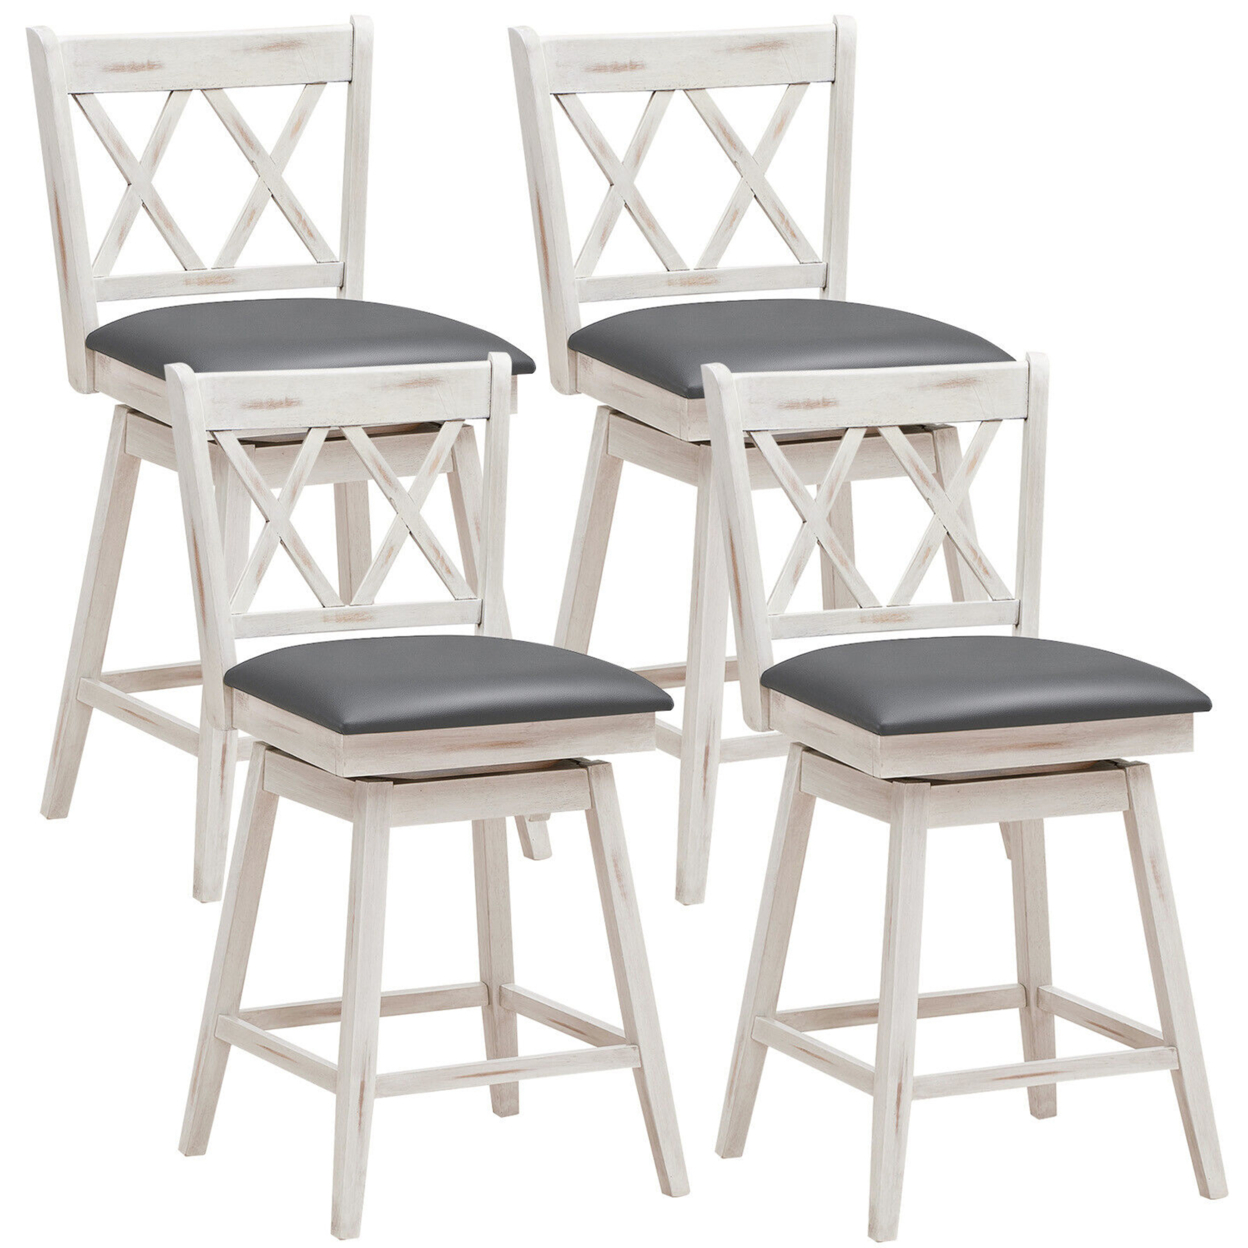 Set Of 4 Barstools Swivel Counter Height Chairs W/Rubber Wood Legs - Antique White